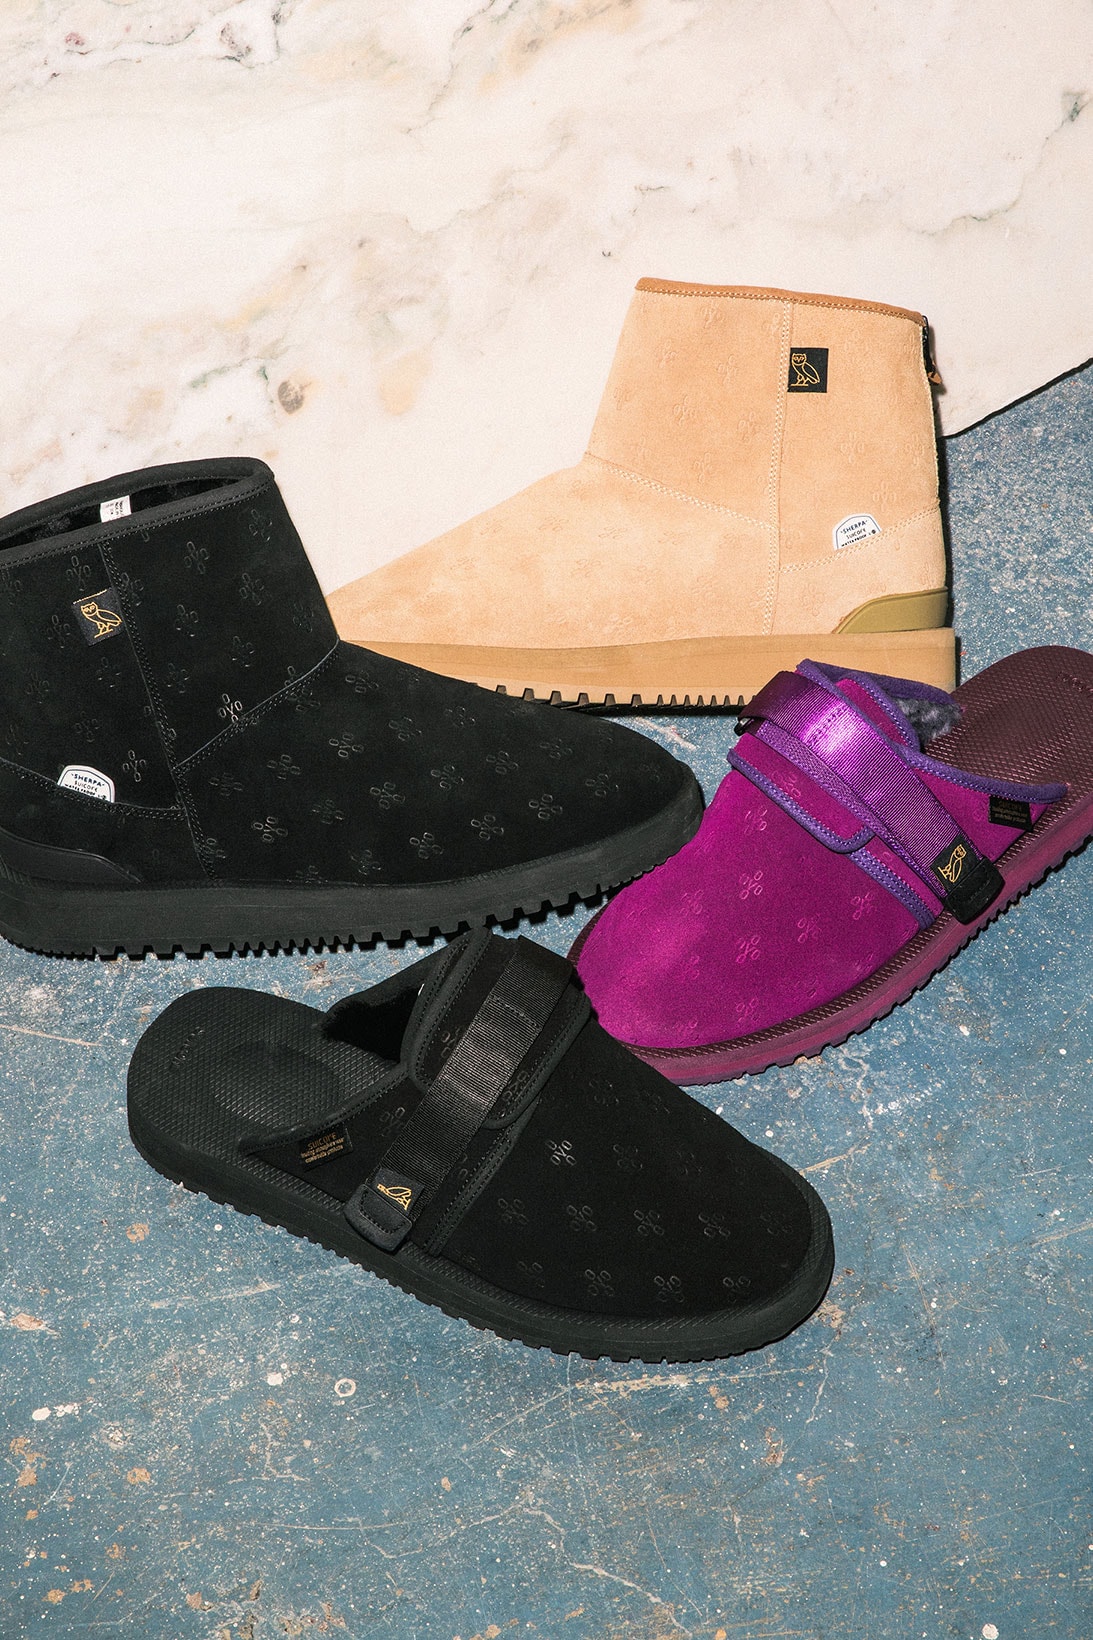 Drake OVO October's Very Own Suicoke Collaboration ELS-M2AB Mid Boots ZAVO-M2AB SANDALS